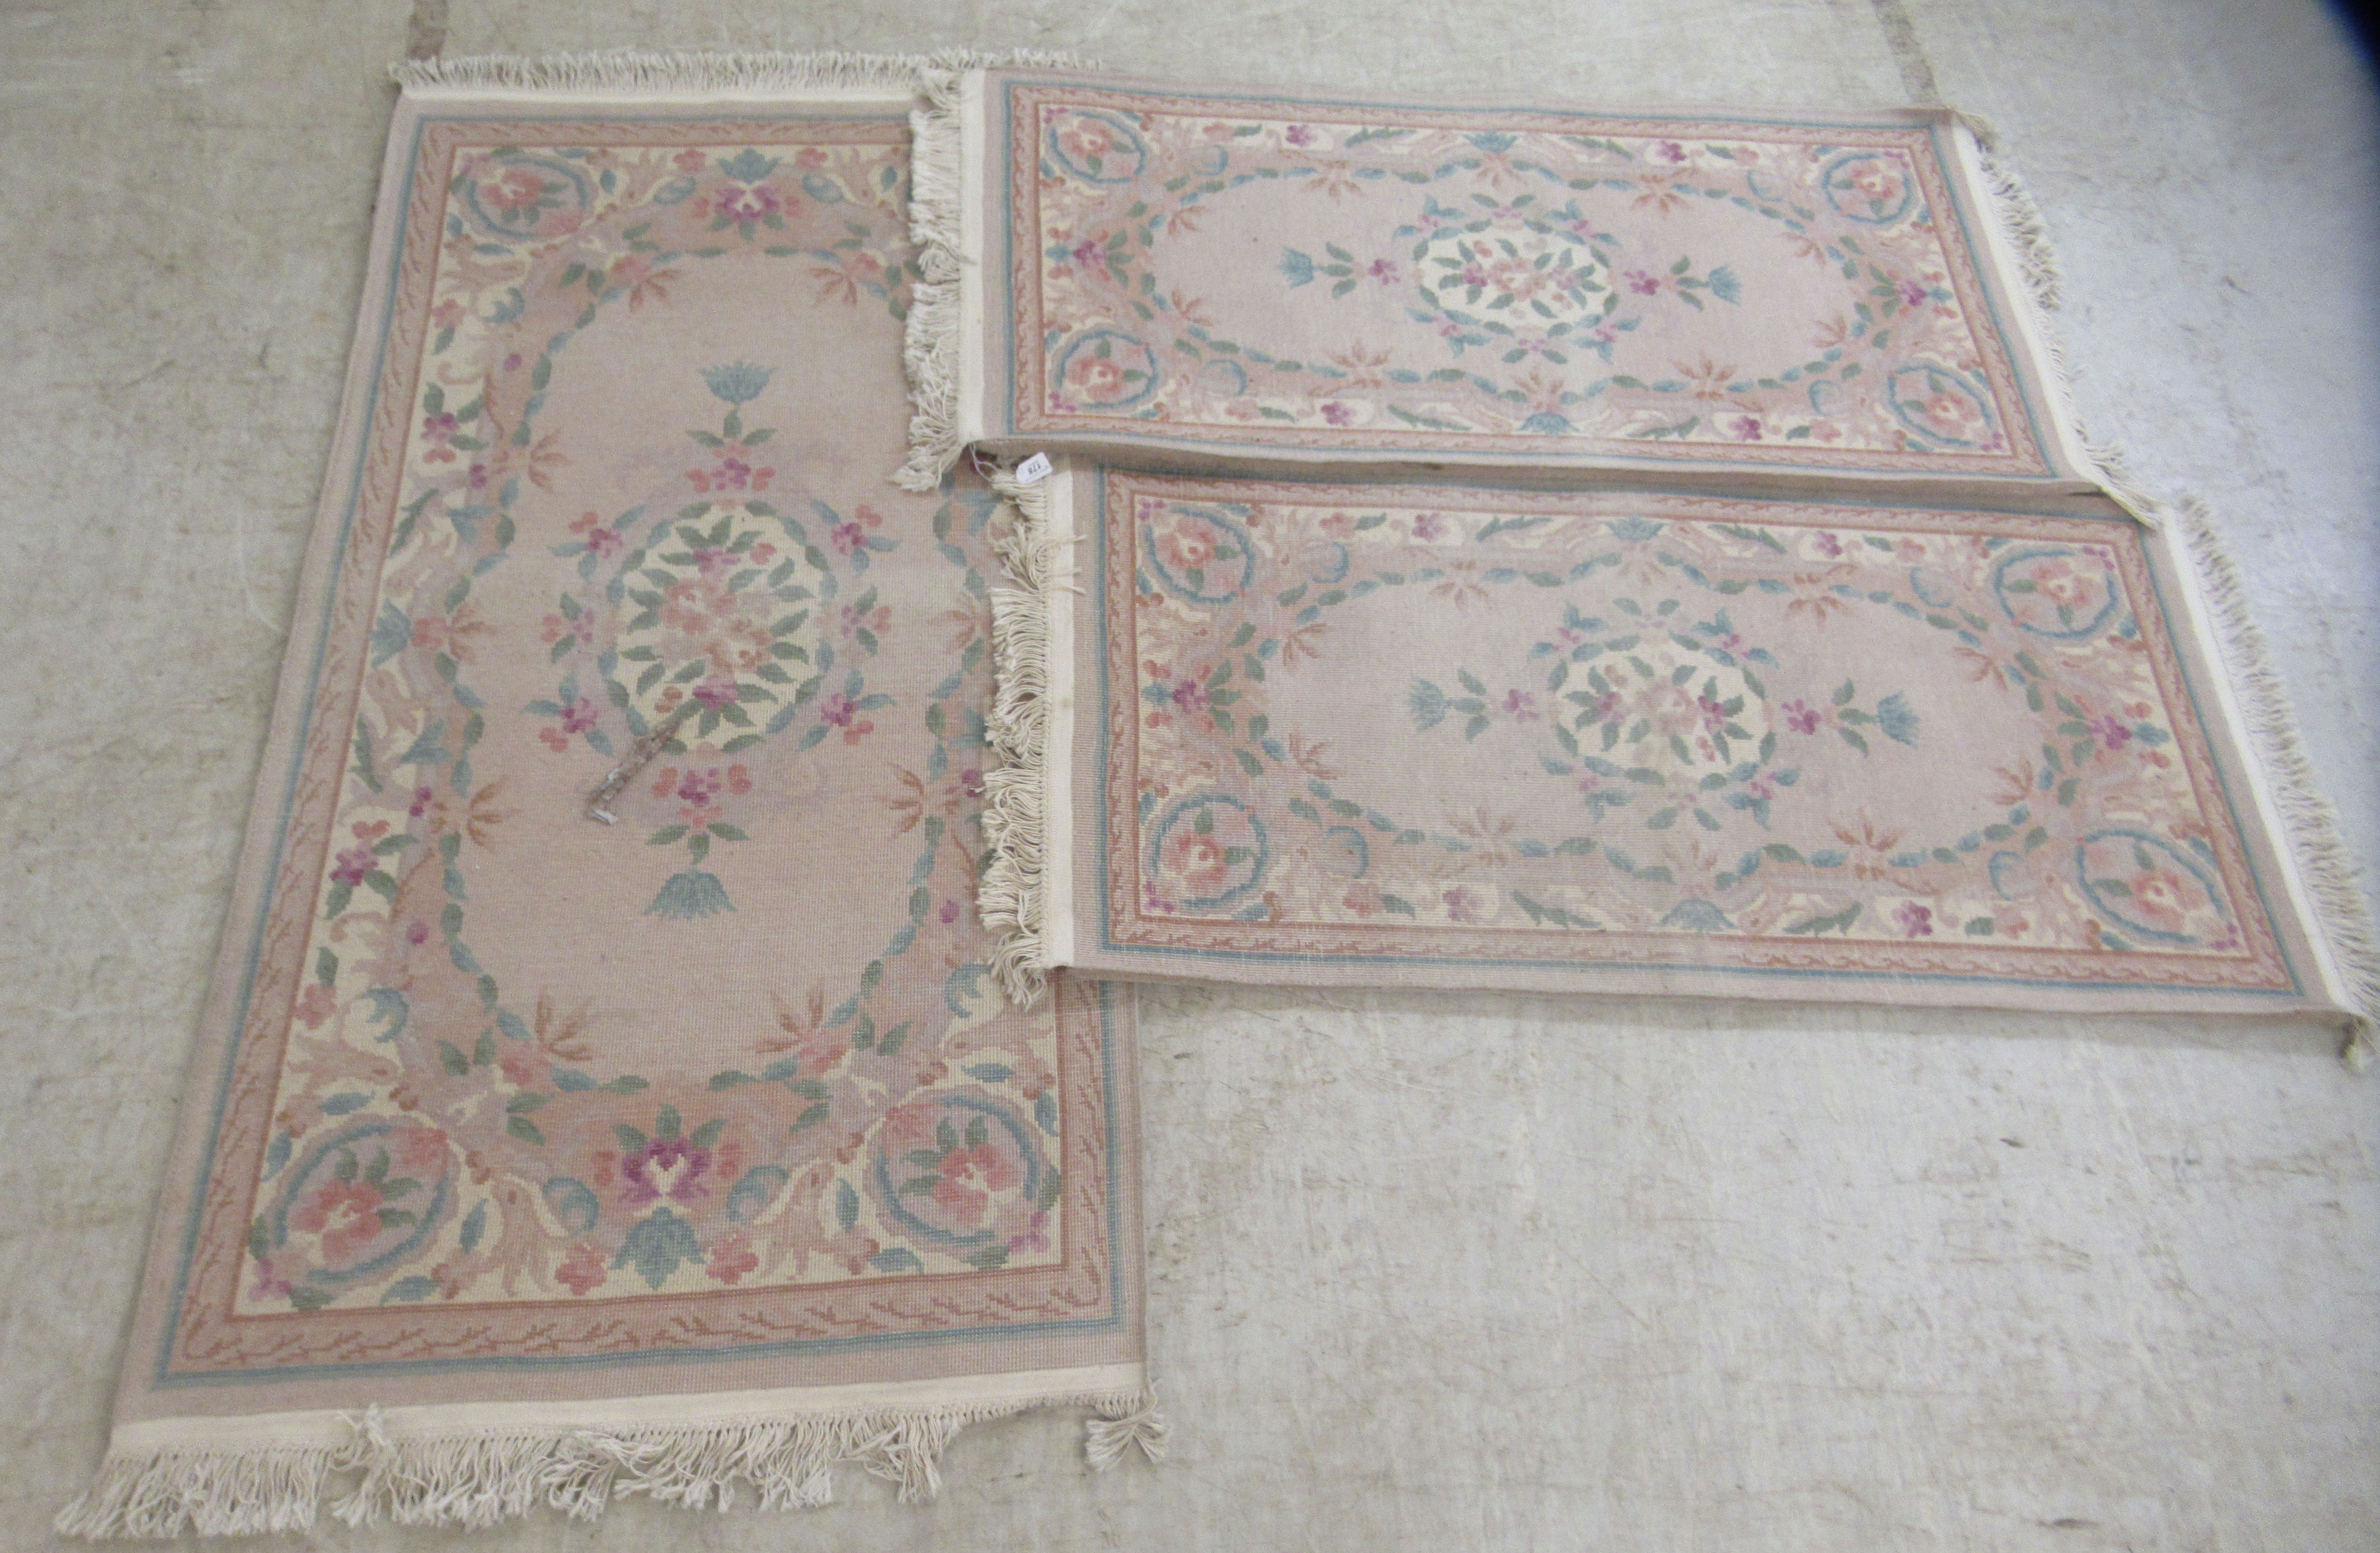 Three identical Chinese cotton rugs, decorated in pastel shades with floral designs  36'' x 60'' and - Image 3 of 3